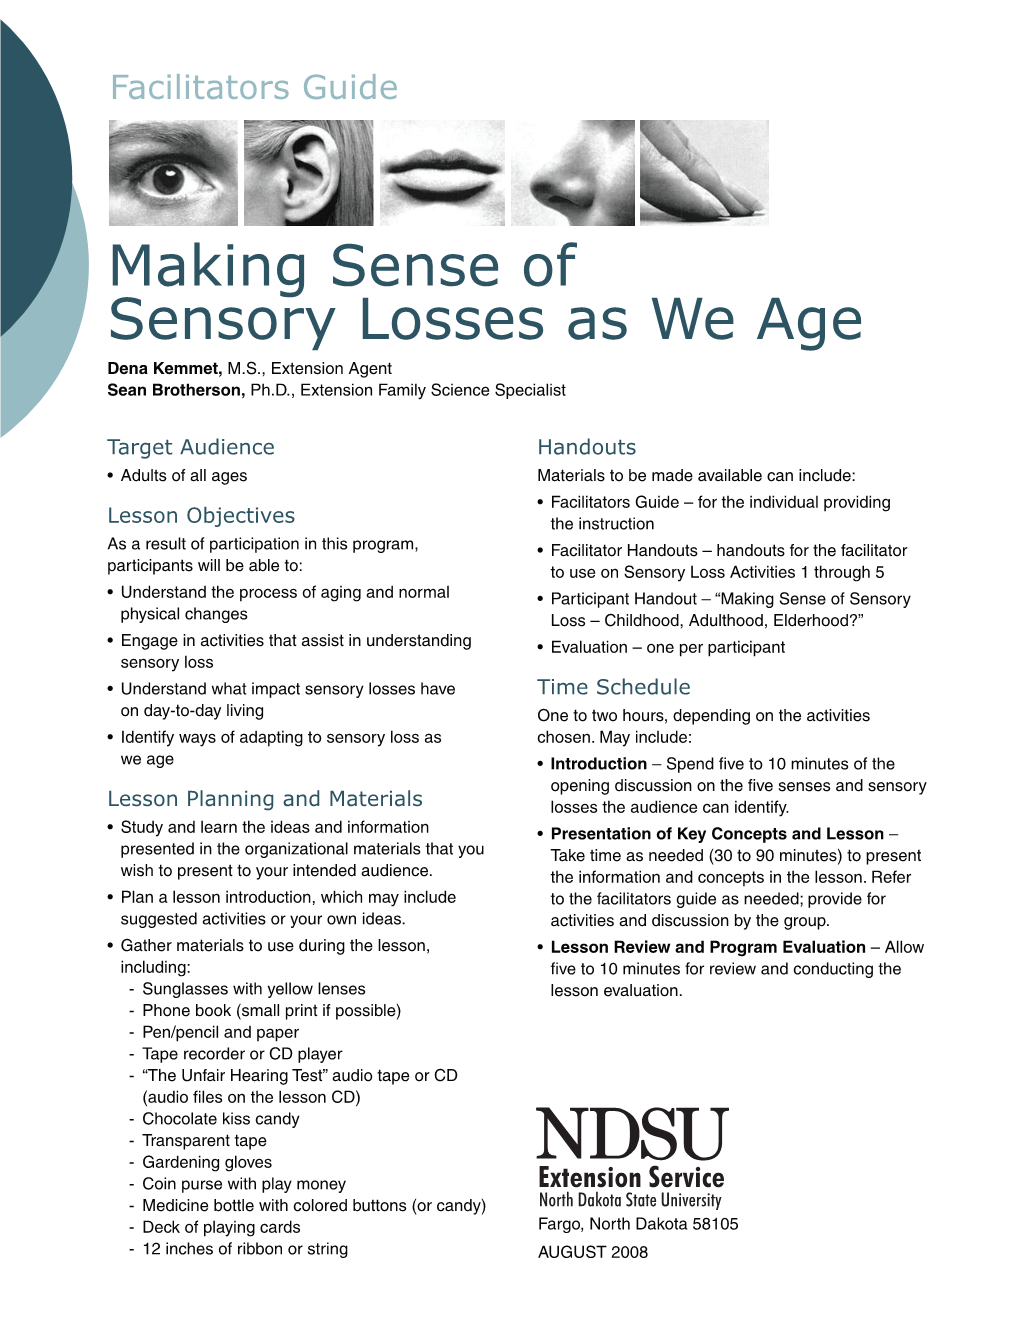 Making Sense of Sensory Losses As We Age Dena Kemmet, M.S., Extension Agent Sean Brotherson, Ph.D., Extension Family Science Specialist